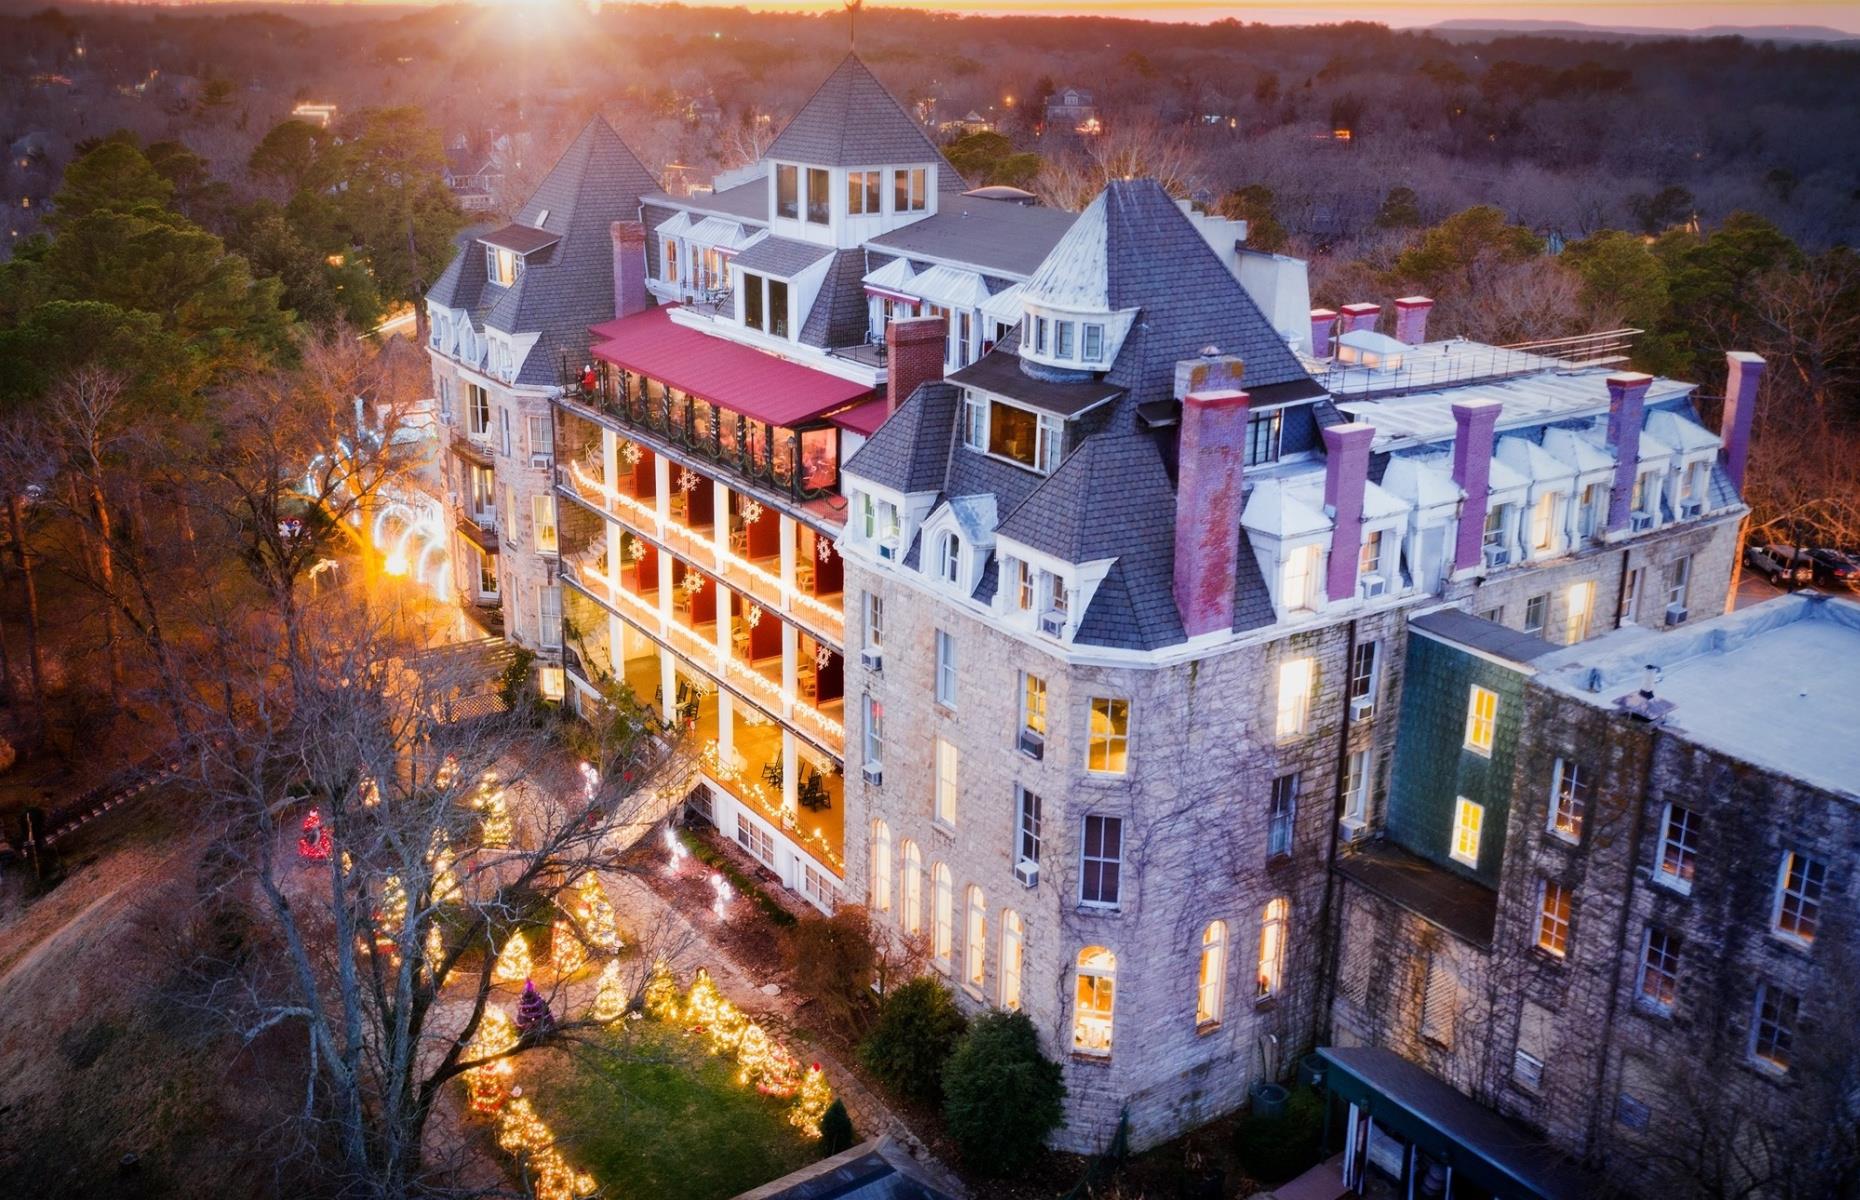 <p>A grand hotel overlooking Eureka Springs city, in the Arkansas section of the Ozark Mountains, the <a href="https://crescent-hotel.com">1886 Crescent</a> is a picture of Southern hospitality. The hotel did indeed first open in 1886, but after becoming rundown it closed for a period and was purchased by new owners in the late 1990s. Both family- and pet-friendly, the resort has plenty of activities, such as ice skating in the winter, plus hiking, lawn games, yoga and wine tastings throughout the rest of the year.</p>